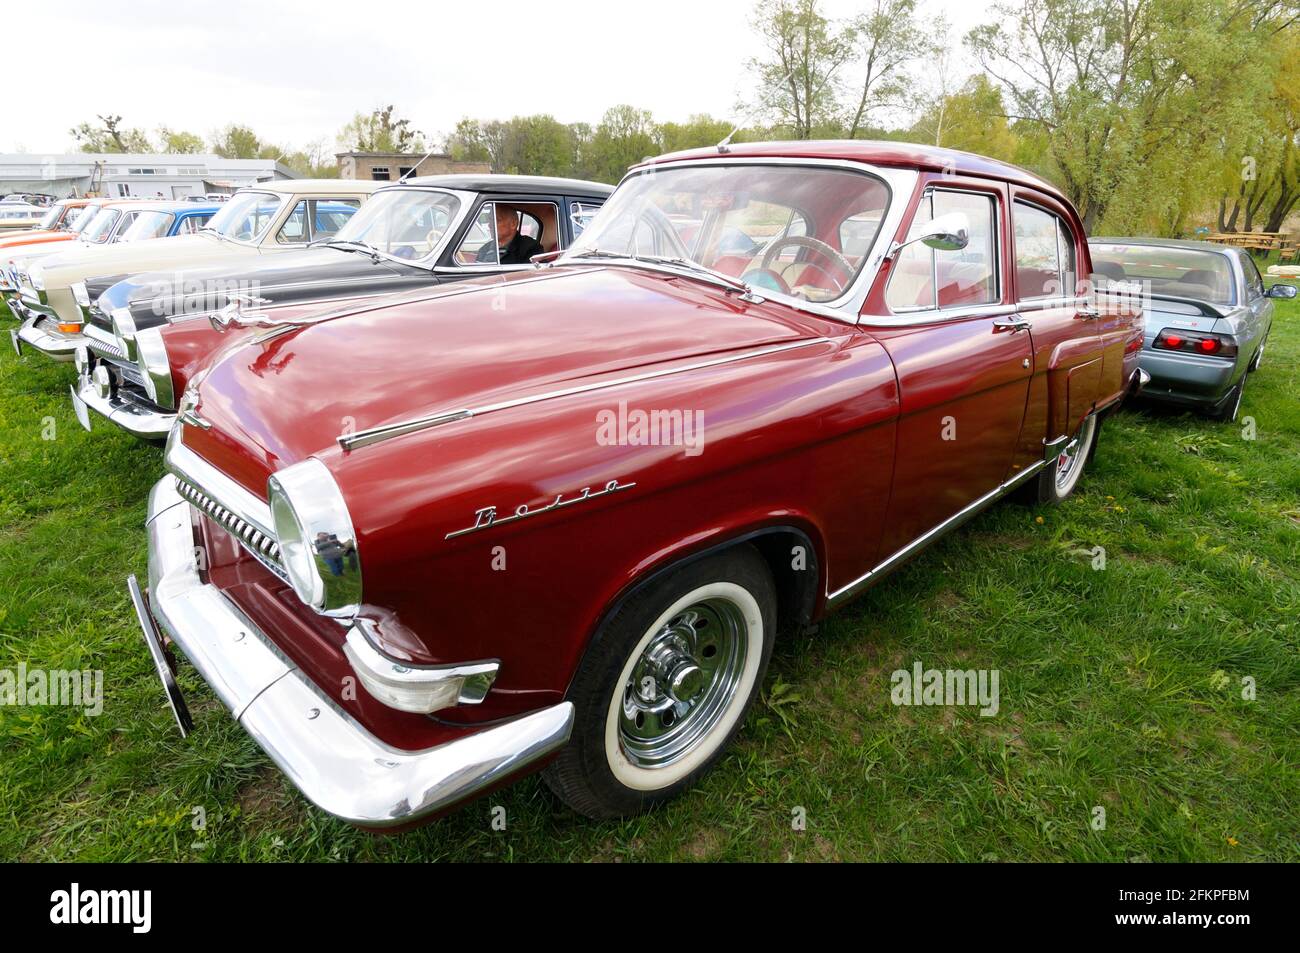 Made in USSR an old car GAZ Volga parked. Festival OLD CAR Land. May 12, 2019. KIev, Ukraine Stock Photo